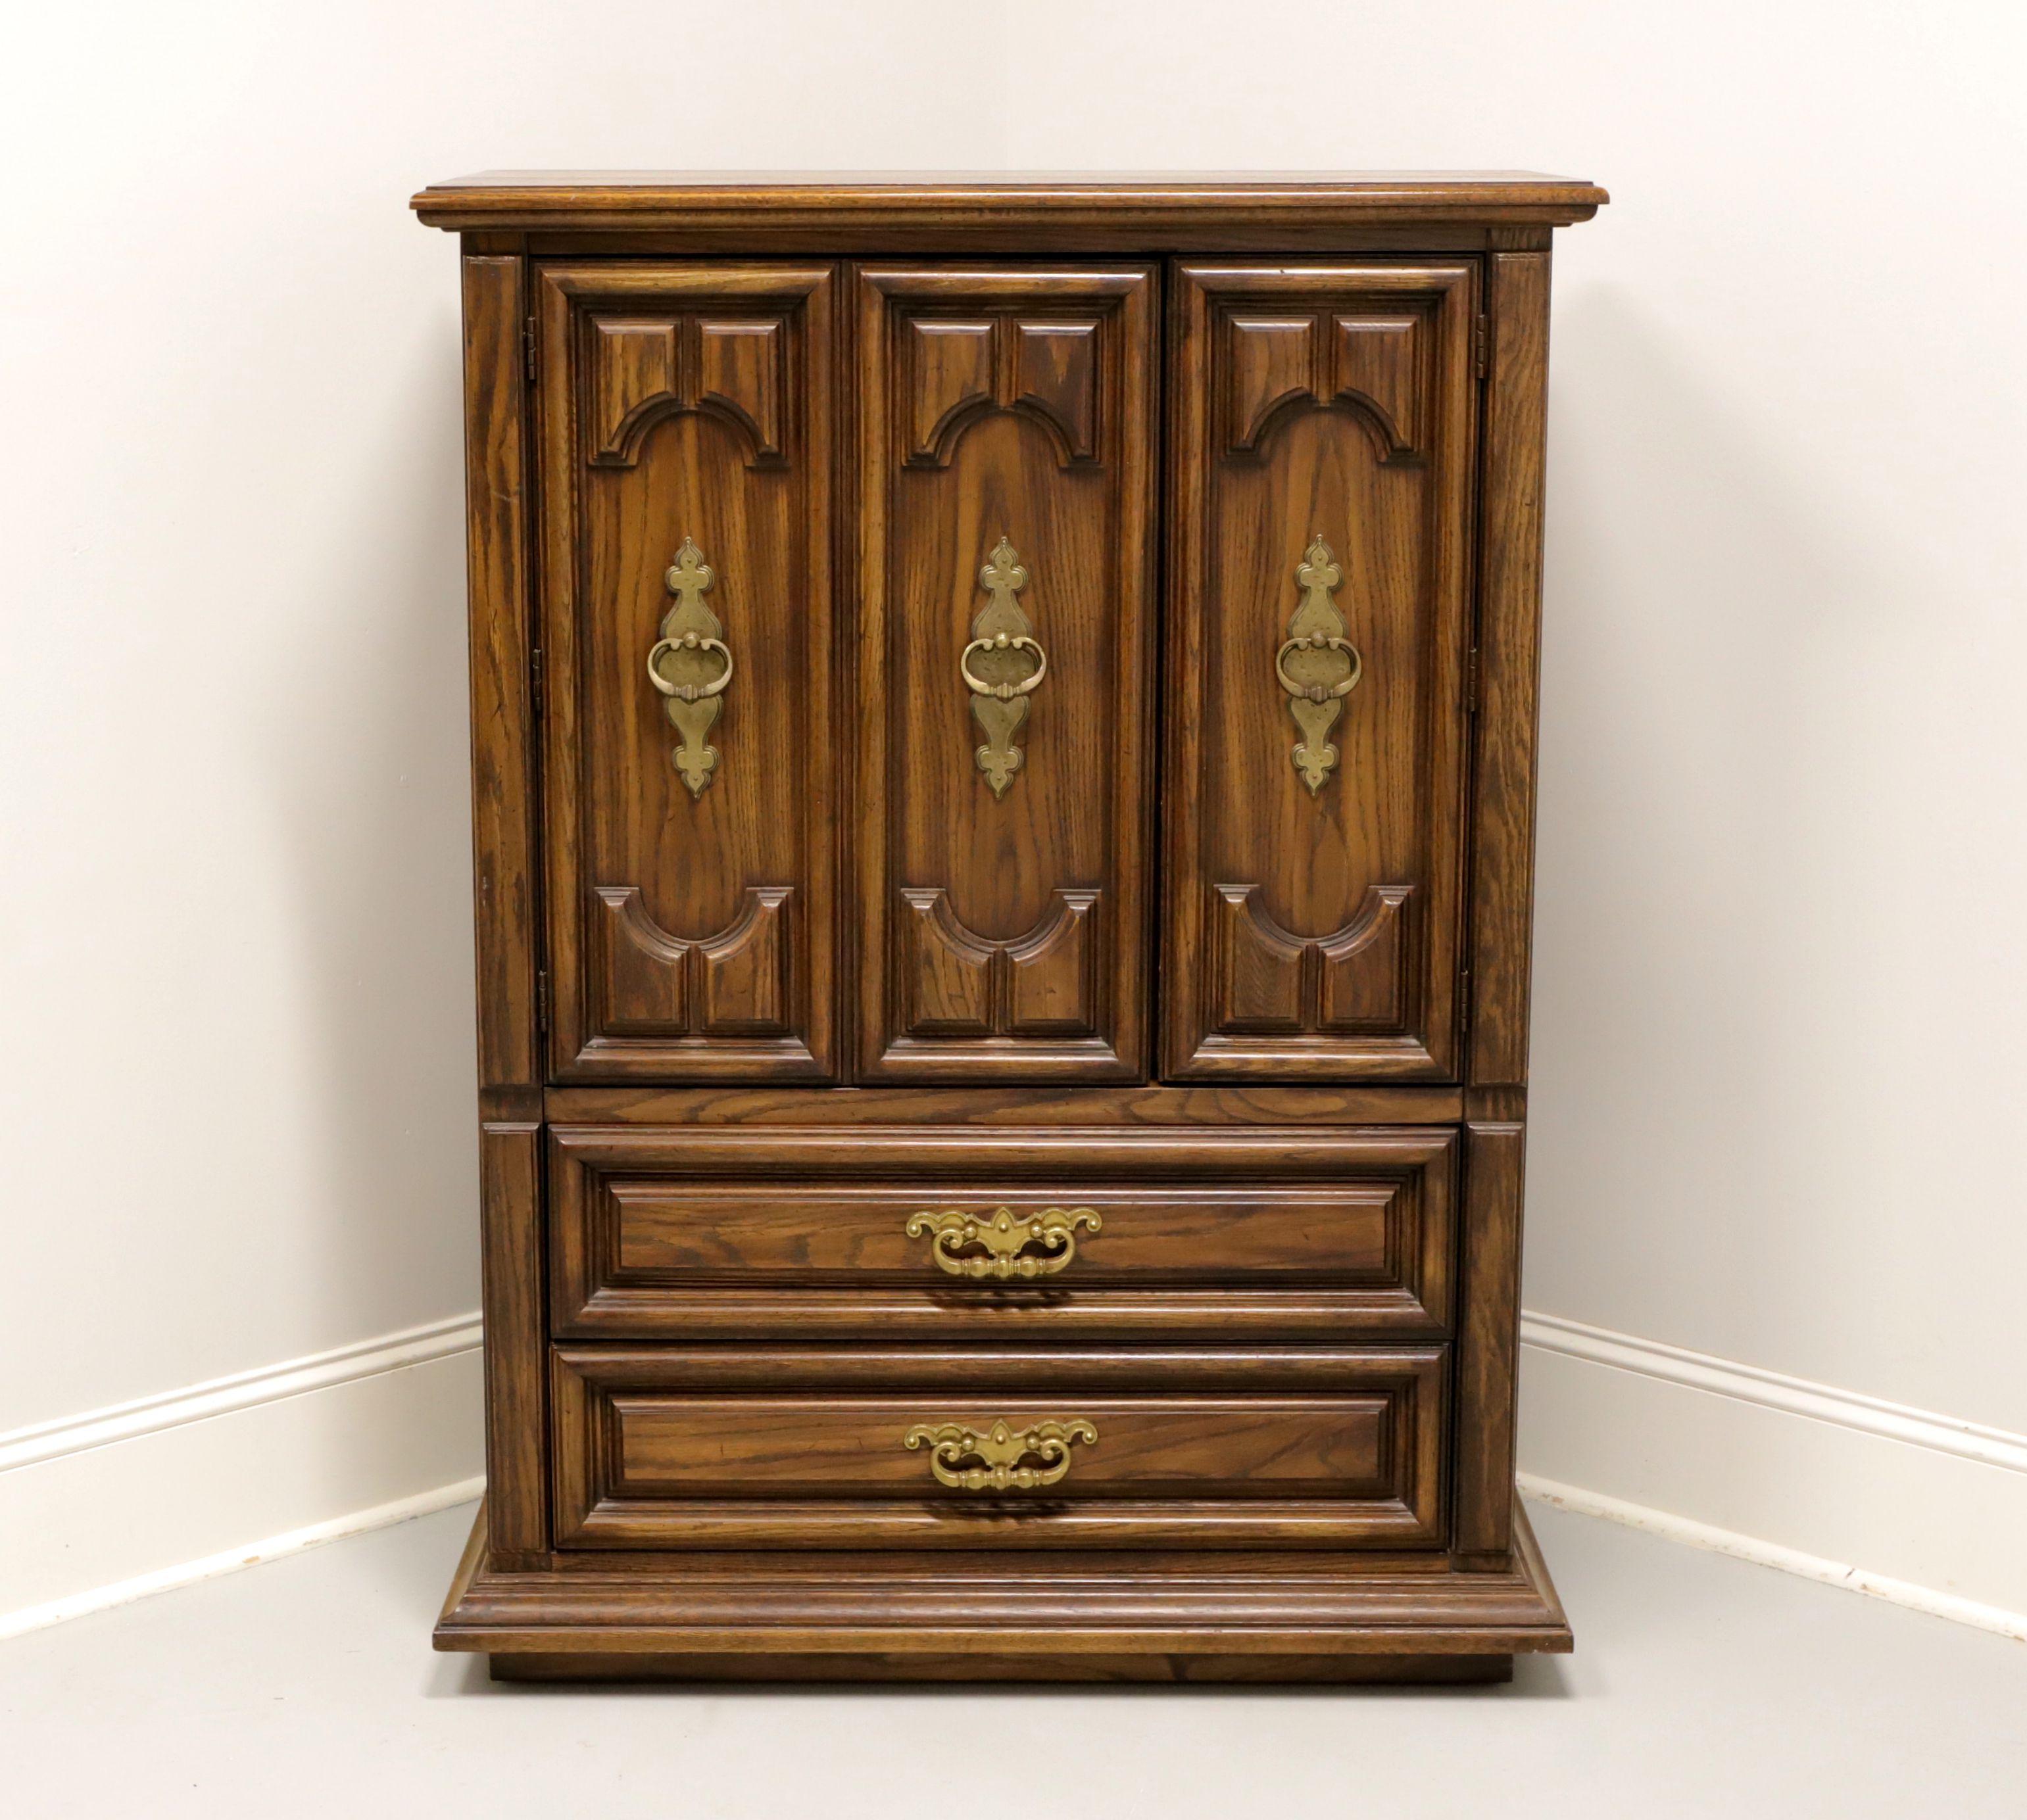 A Spanish Mediterranean style gentleman's chest by Thomasville, from their Segovia Collection. Solid oak with slightly distressed finish, bevel edge top, brass hardware, raised door & drawer fronts, and a solid base. Upper cabinet features triple